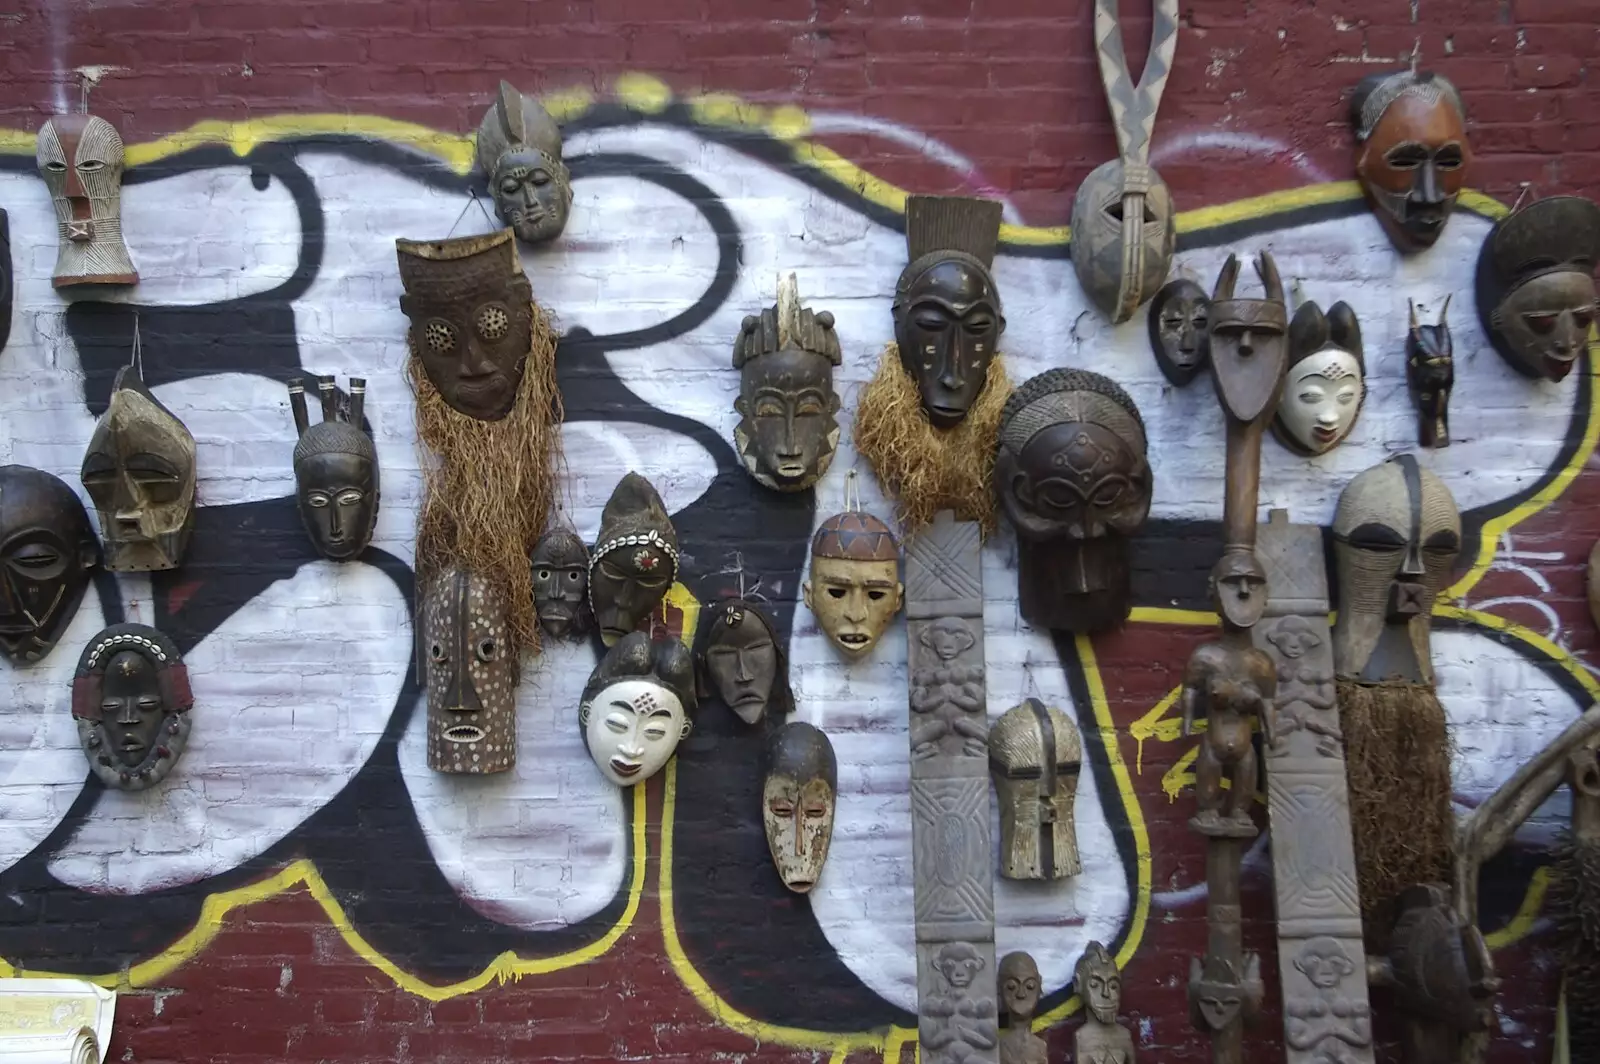 An interesting collection of masks on a wall, from Crossing Brooklyn Bridge, New York, US - 26th March 2007